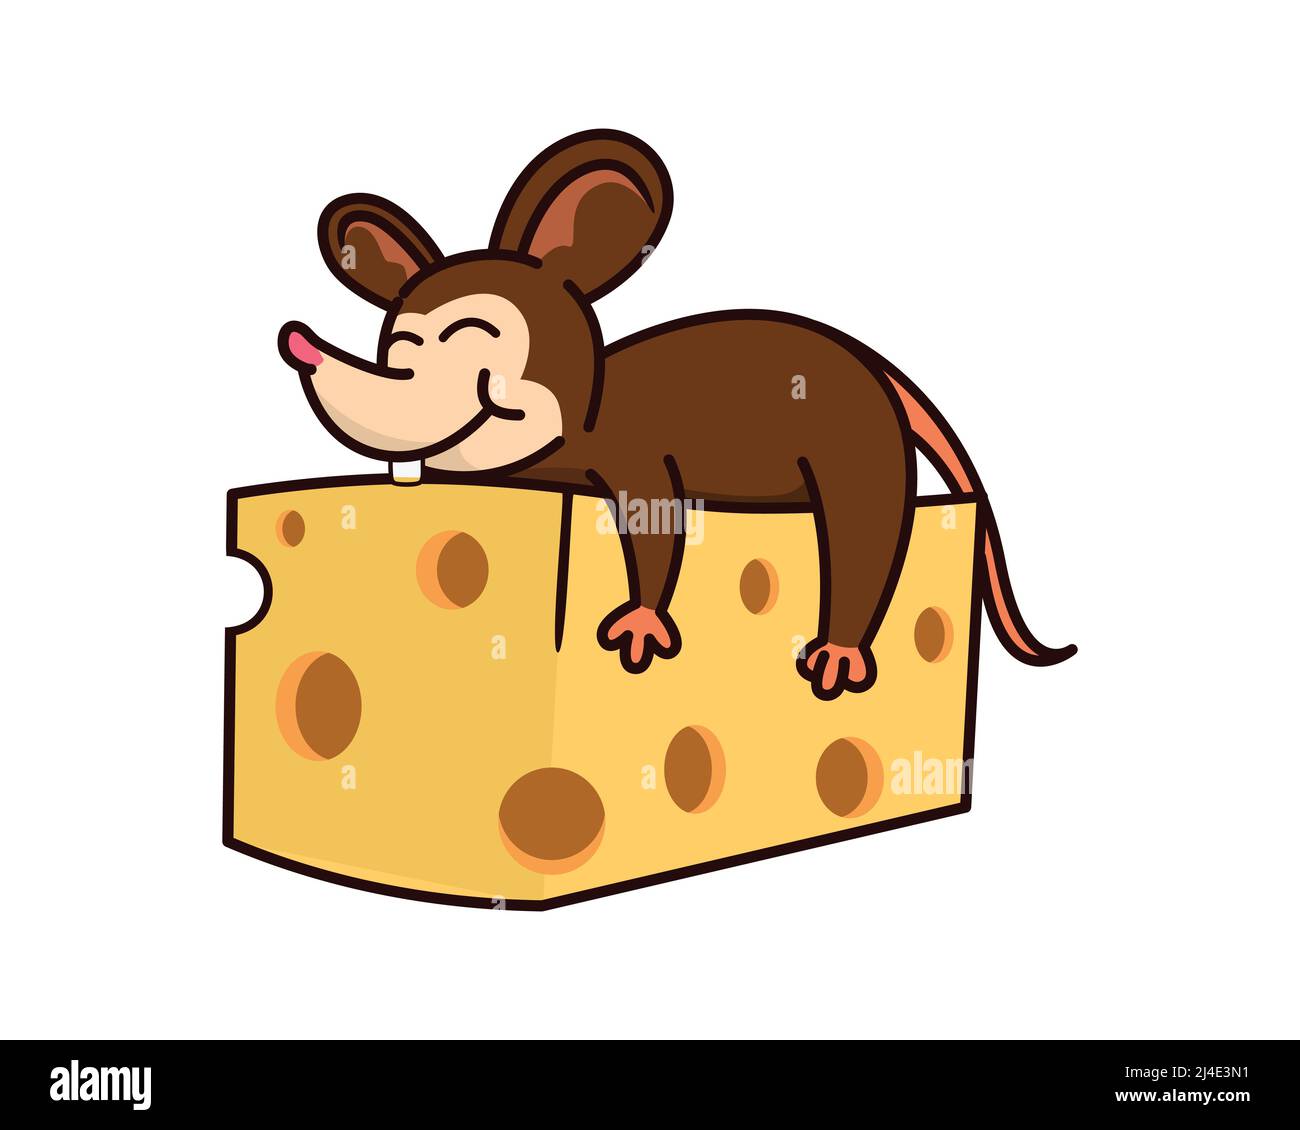 Cute and Sweet Mouse Hugging Cheese Illustration Stock Vector ...